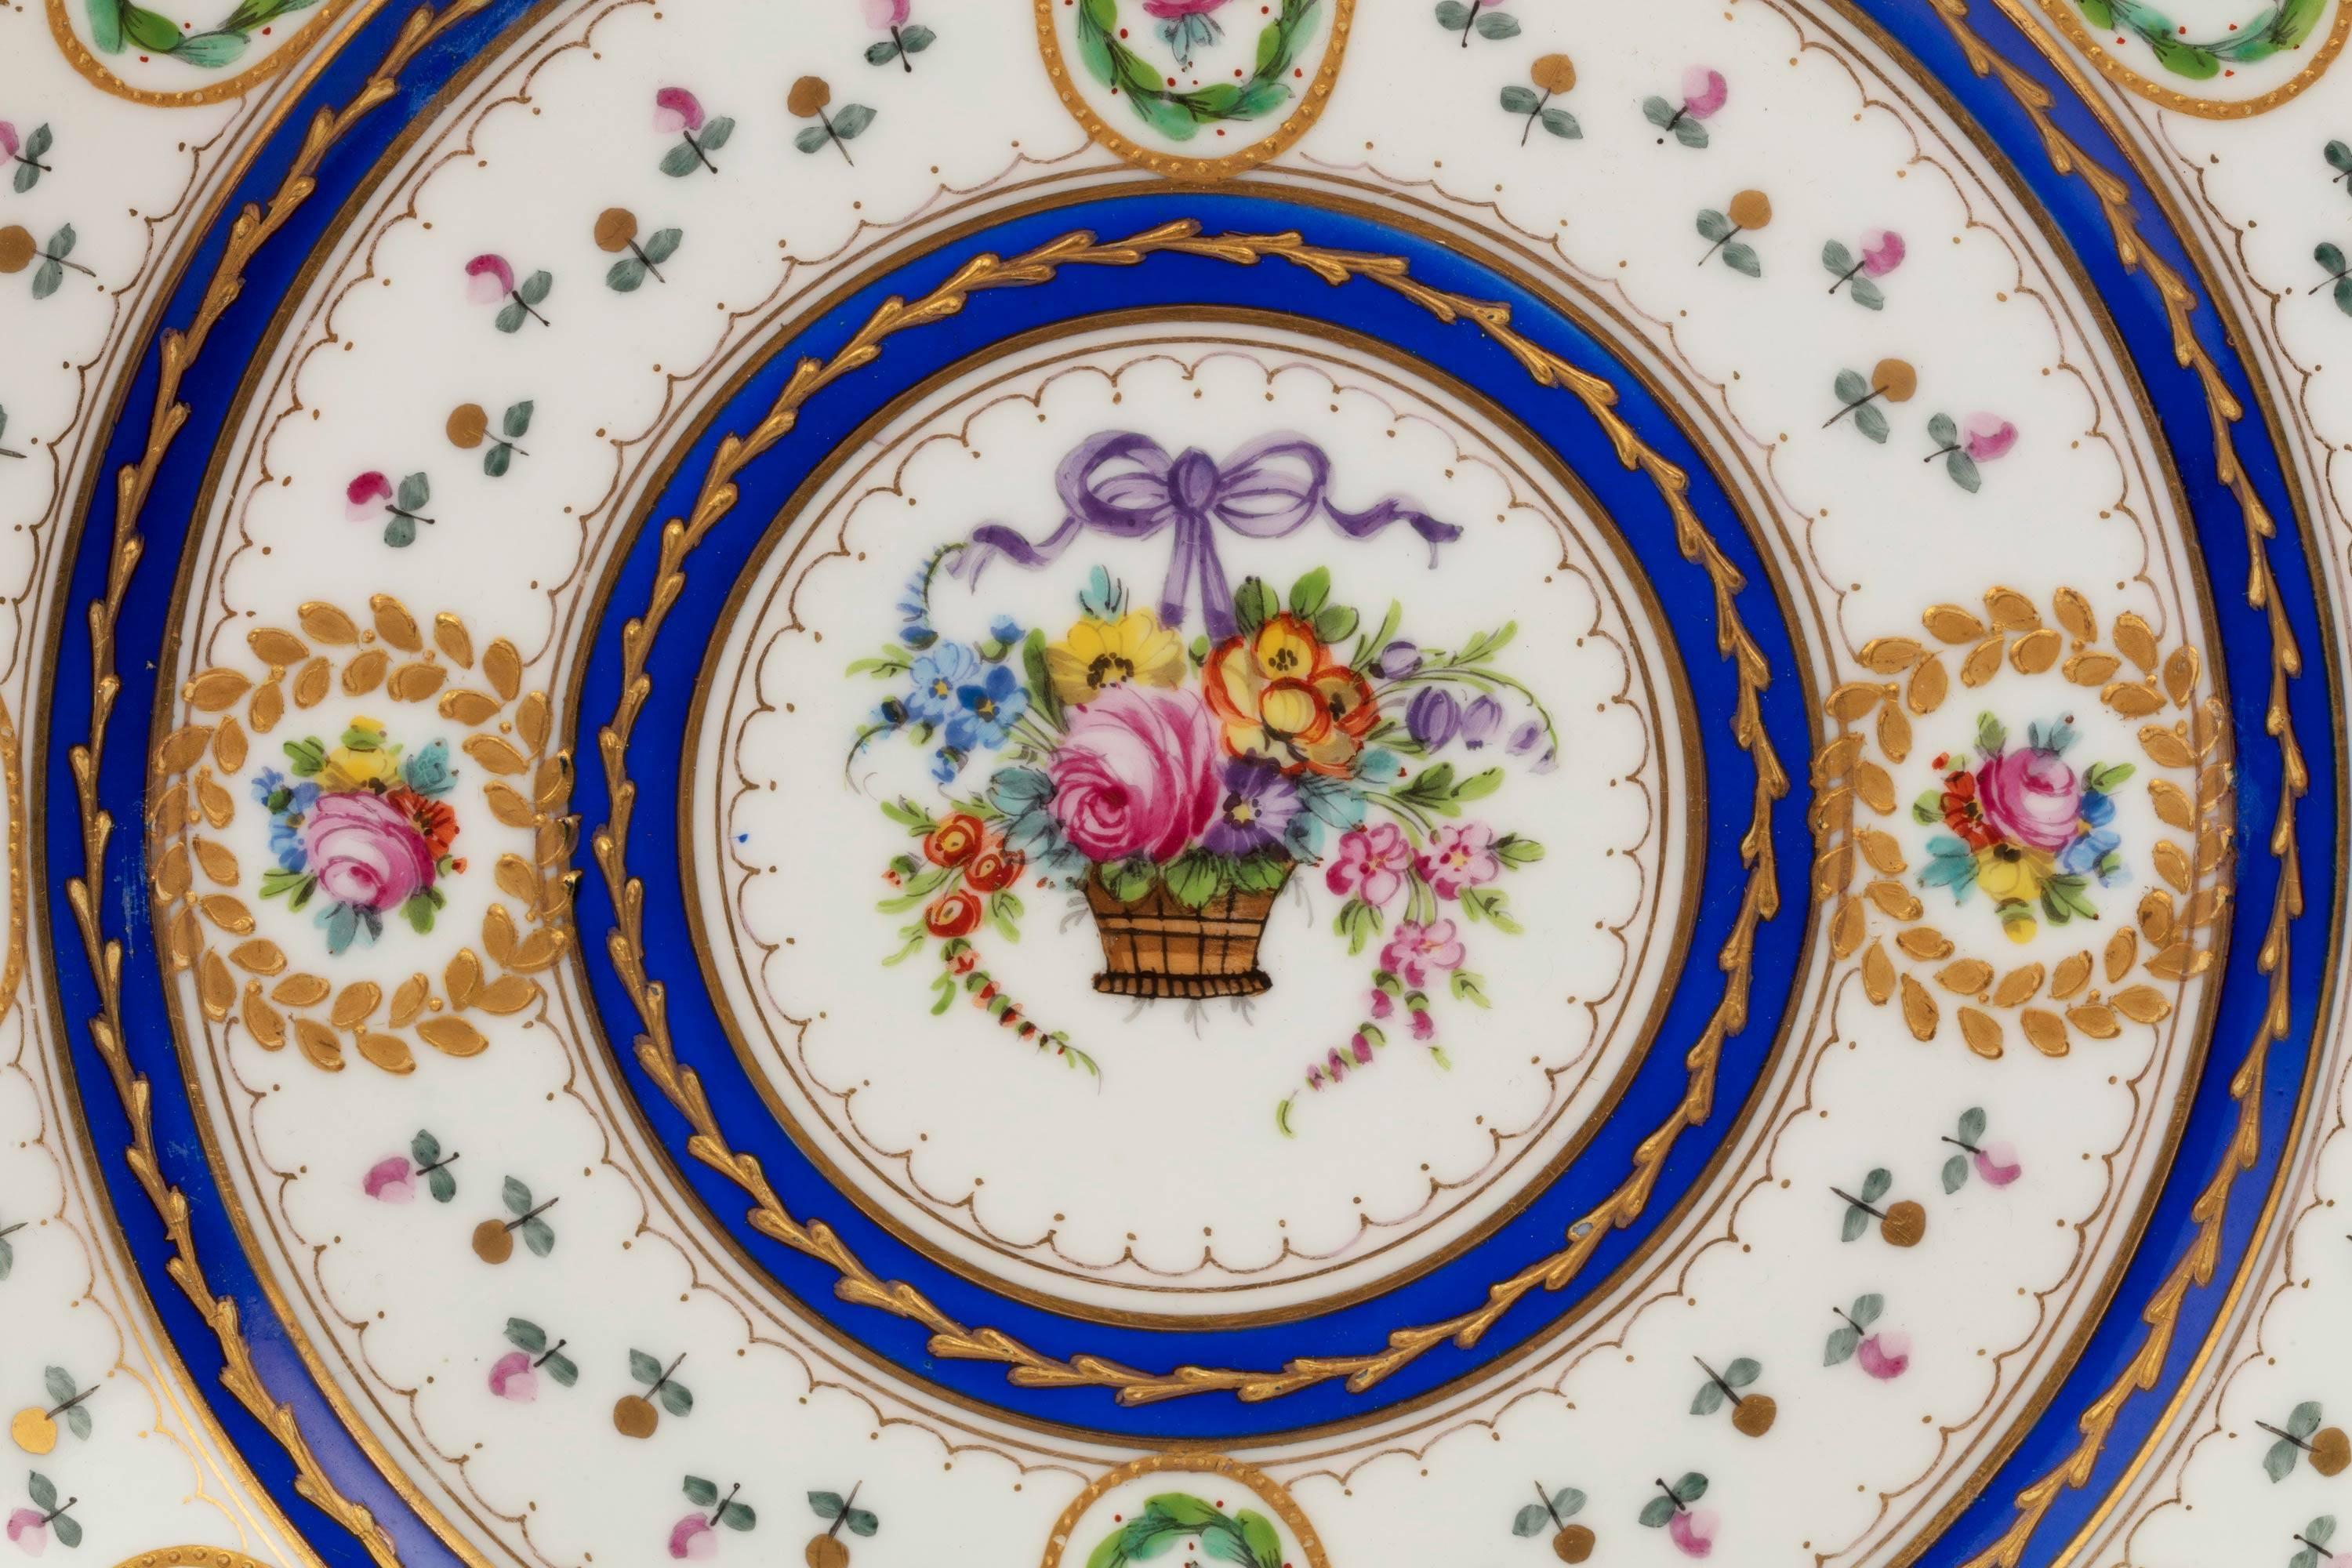 English Pair of Late 19th Century Serve Porcelain Enameled Plates